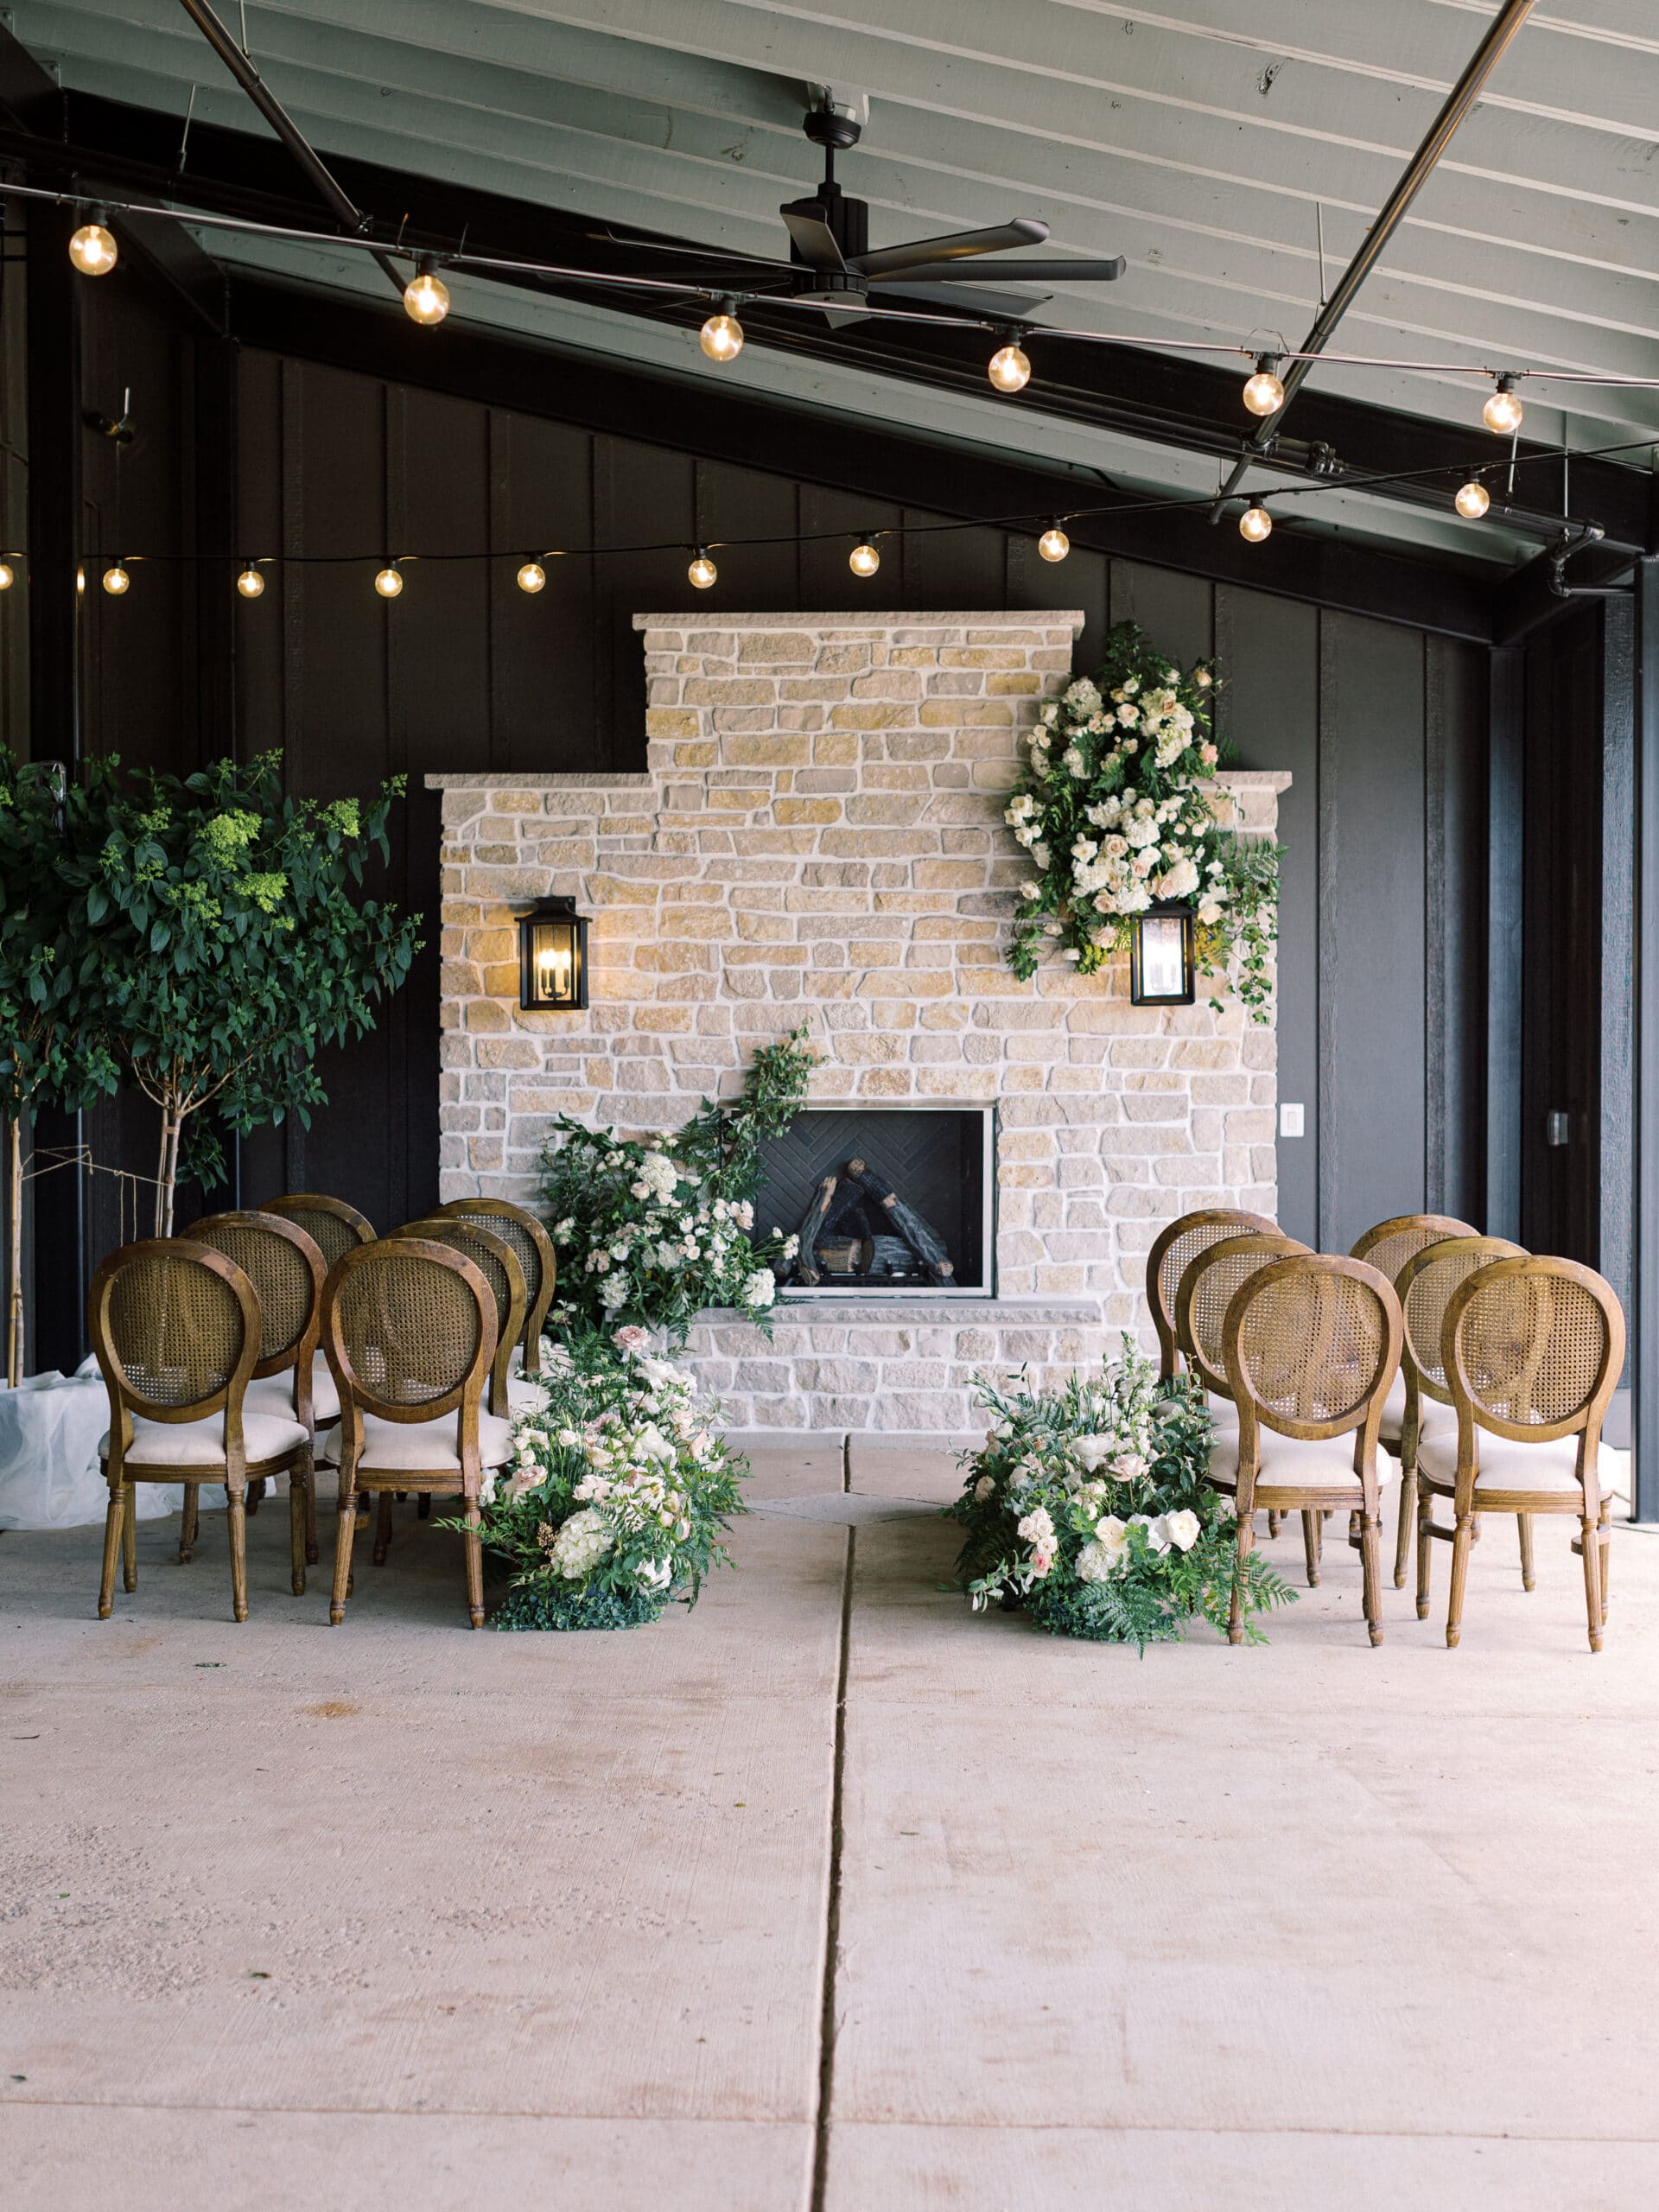 Get married by the fireplace or just hang out afterwards with your guests